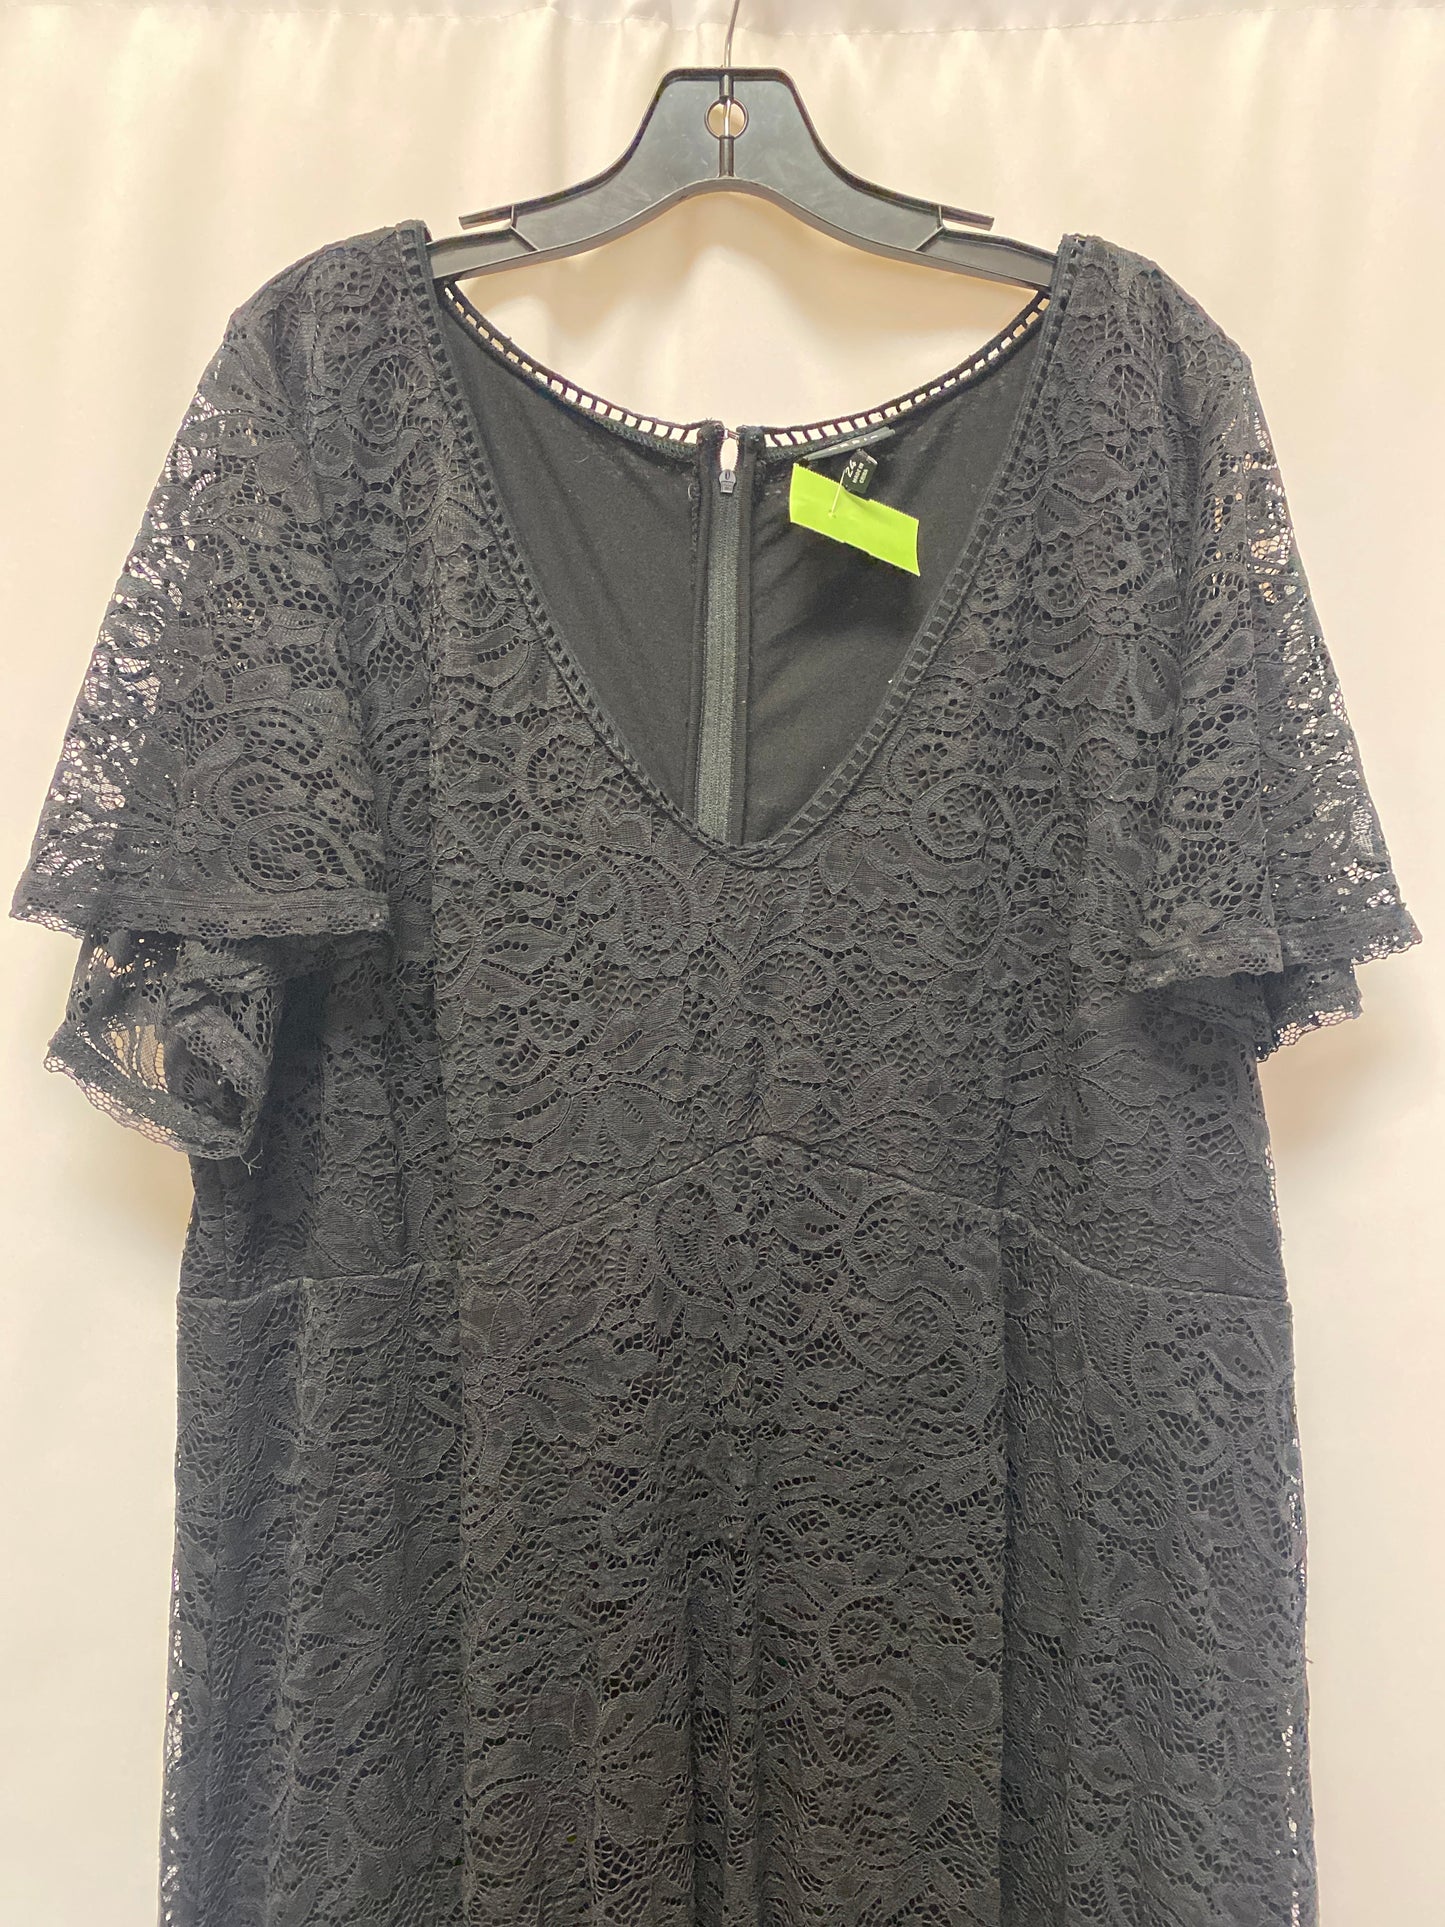 Dress Casual Maxi By Torrid  Size: 3x